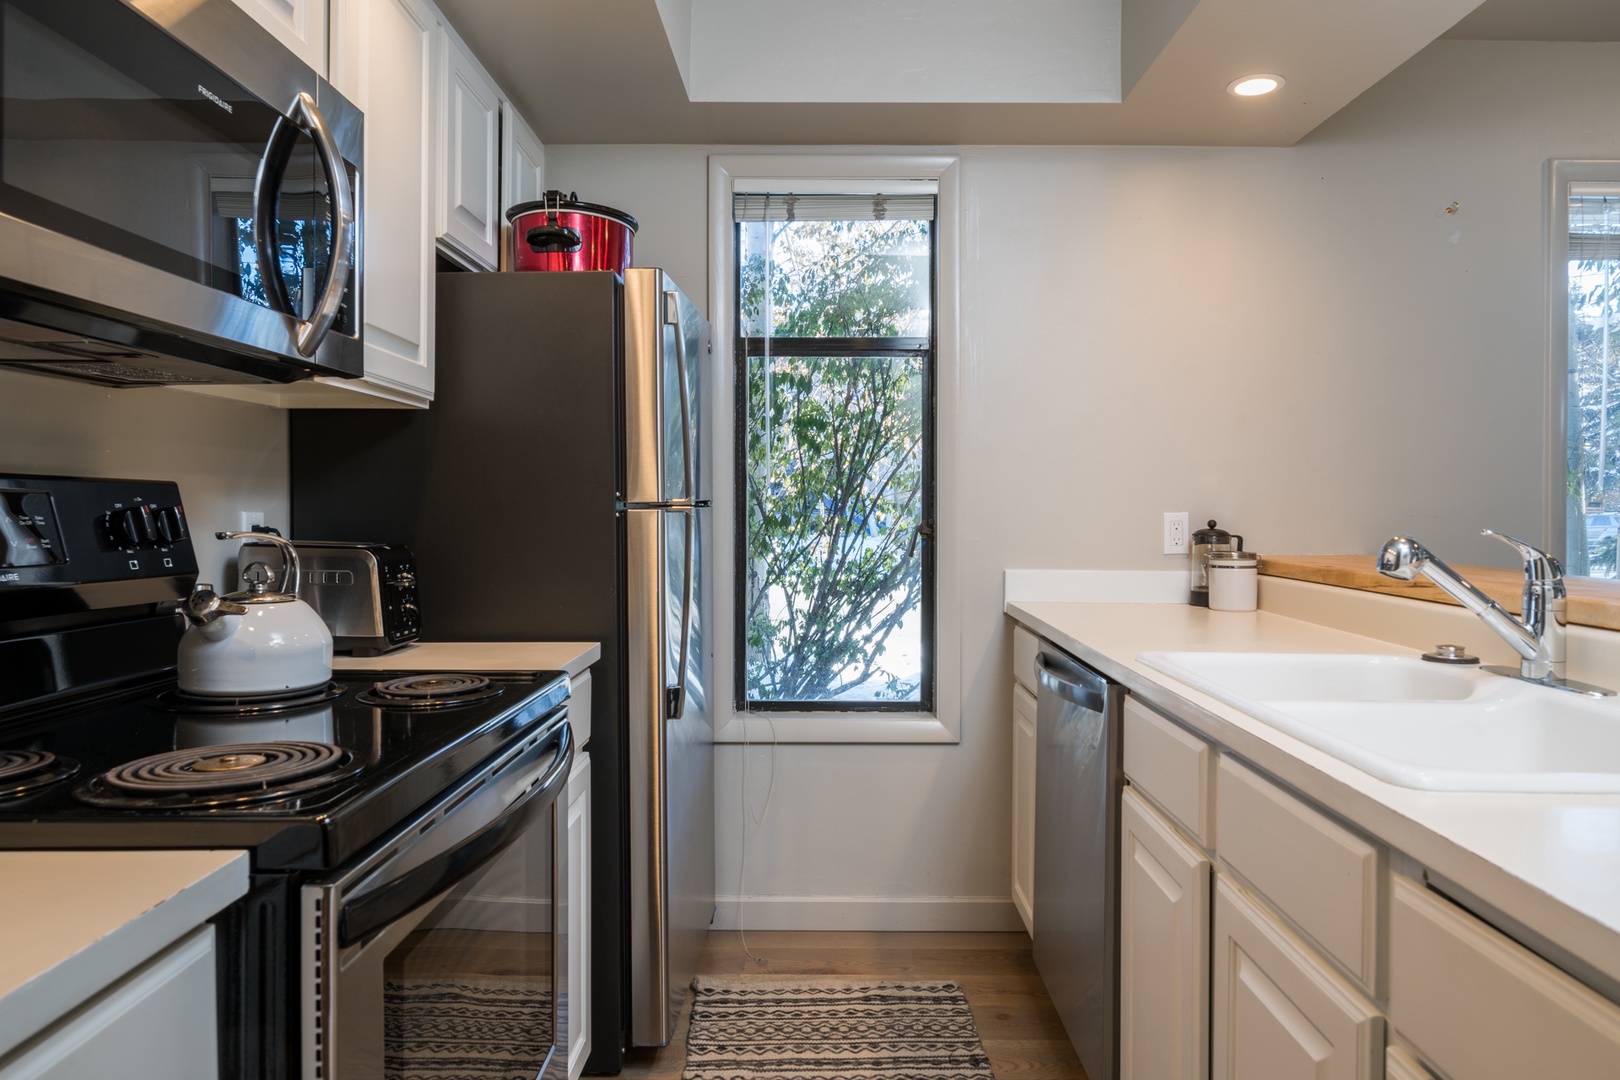 Ketchum Vacation Rentals, Town & Slopes - Fully equipped kitchen for all your cooking needs, a pull-up bar, a dining nook, smart tv, and a fireplace.